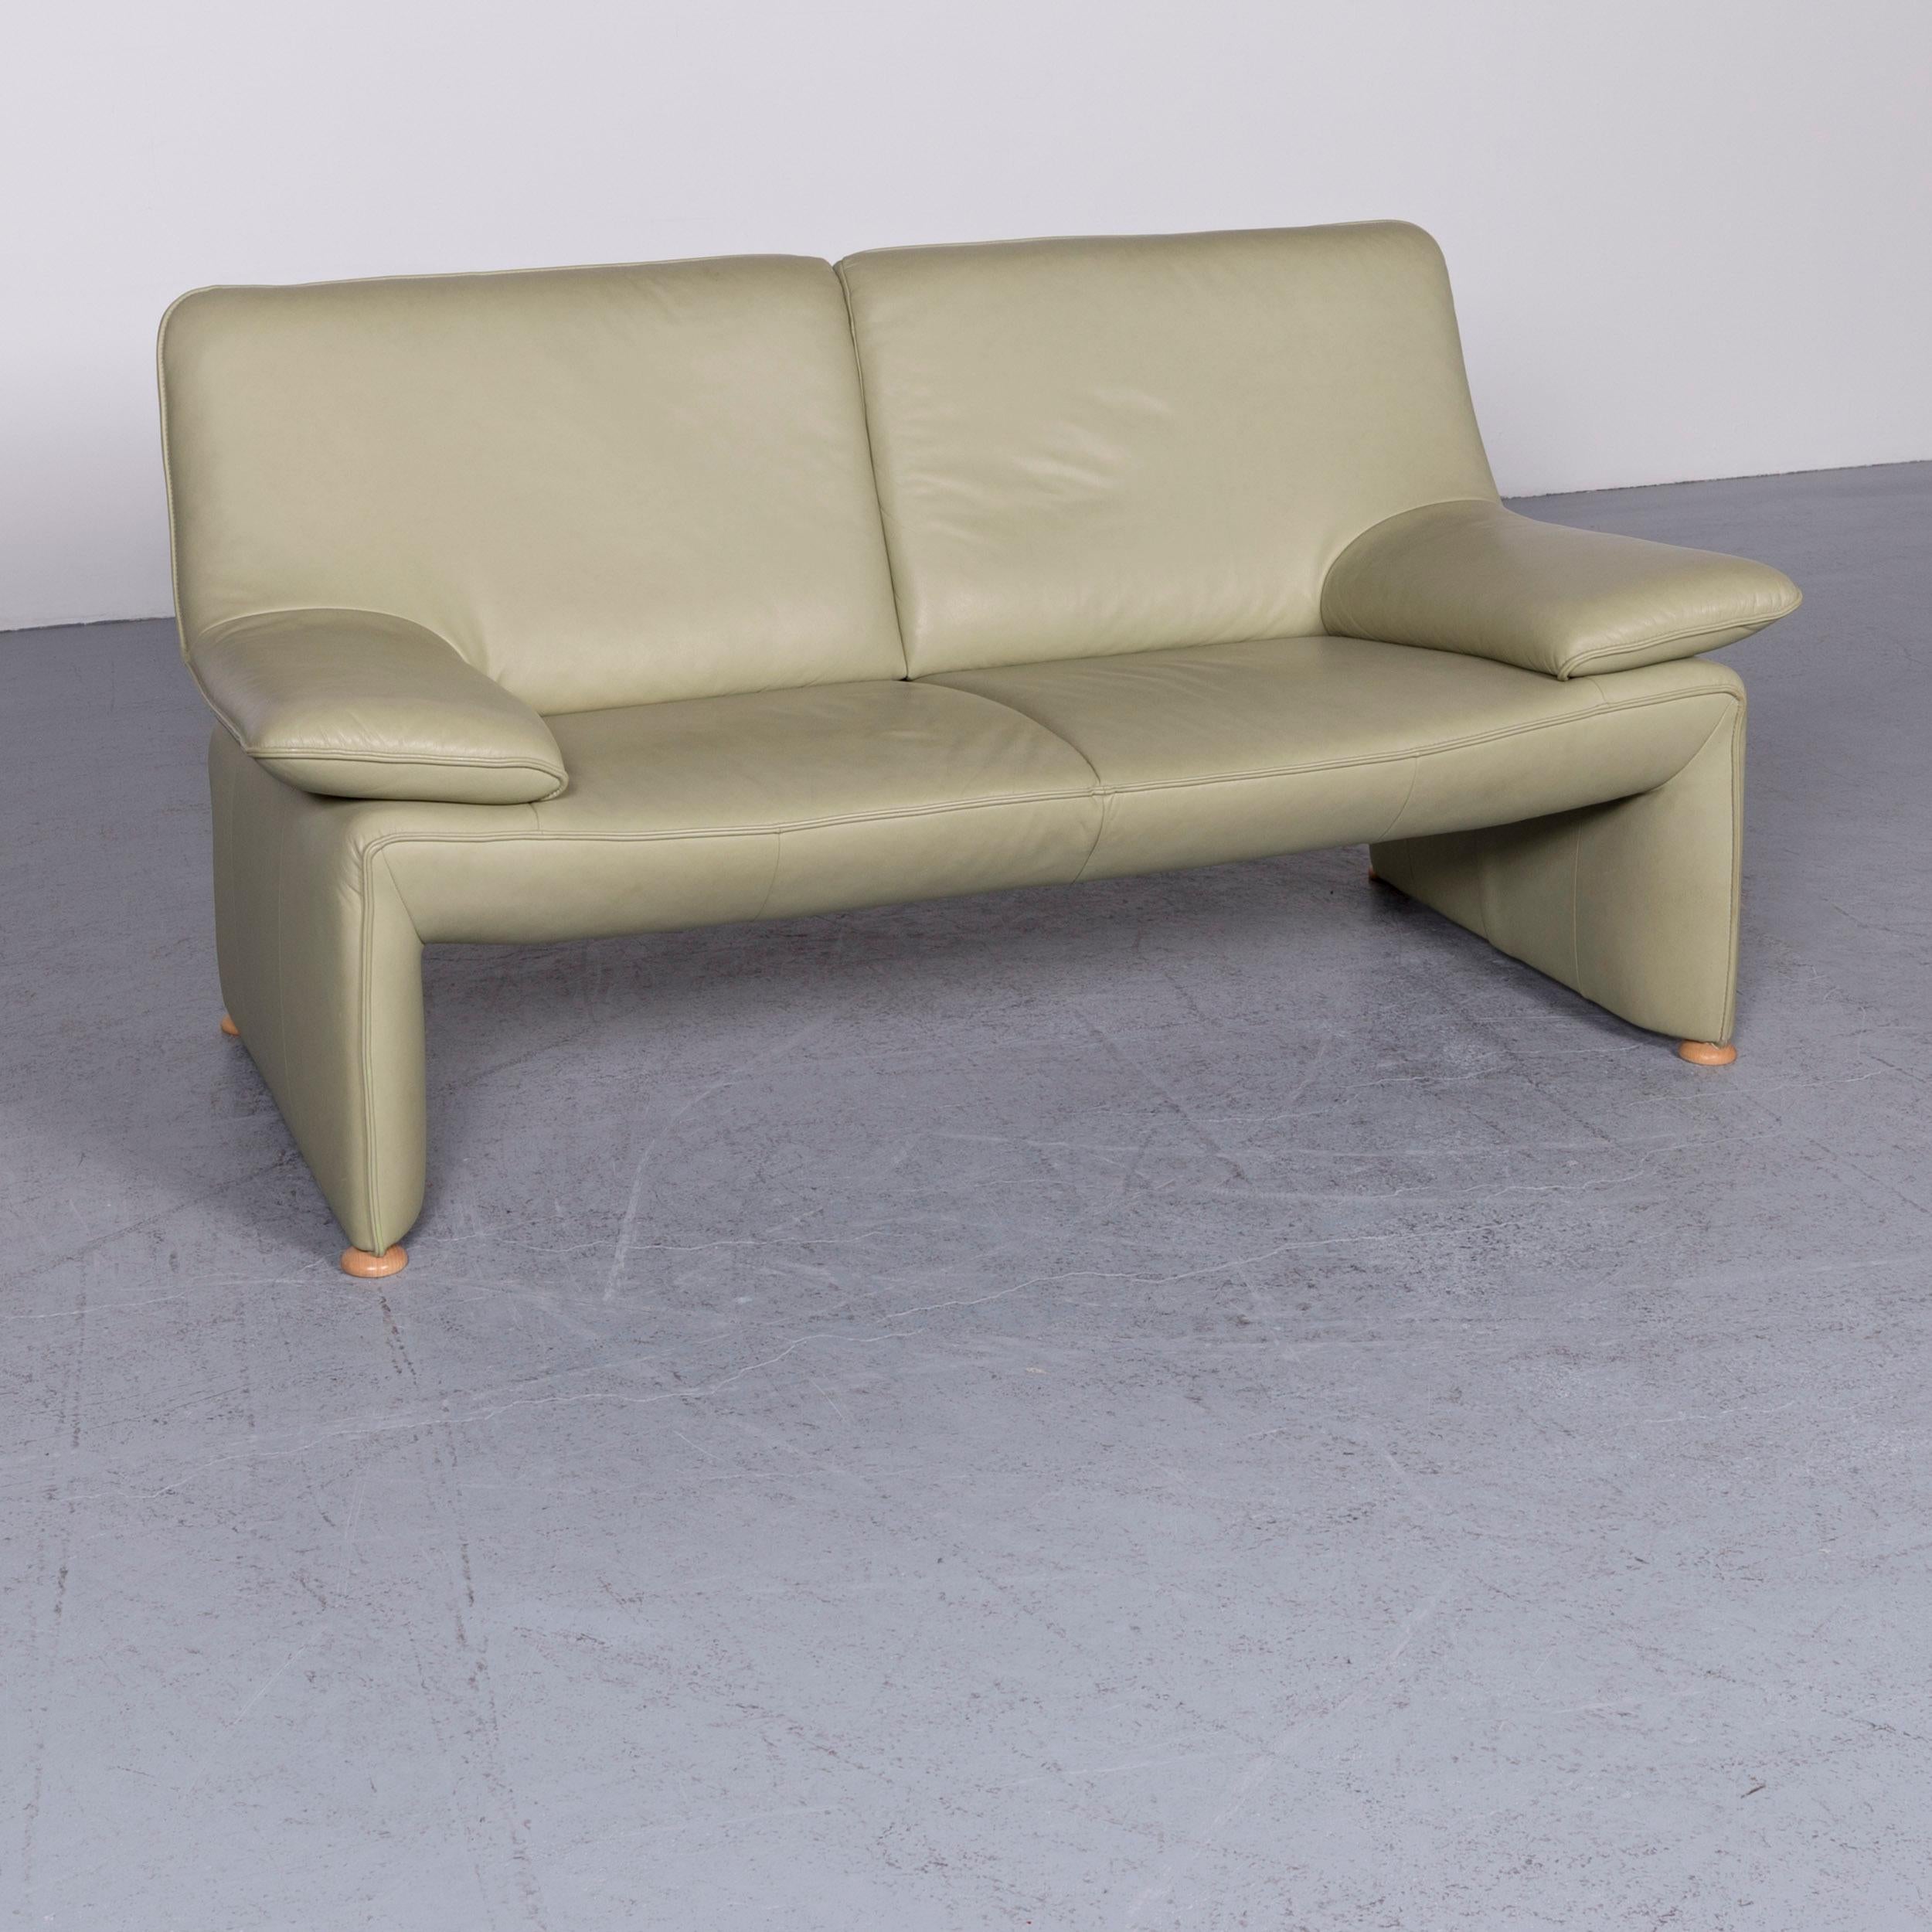 We bring to you a Laauser Flair designer sofa leather green two-seat couch modern.